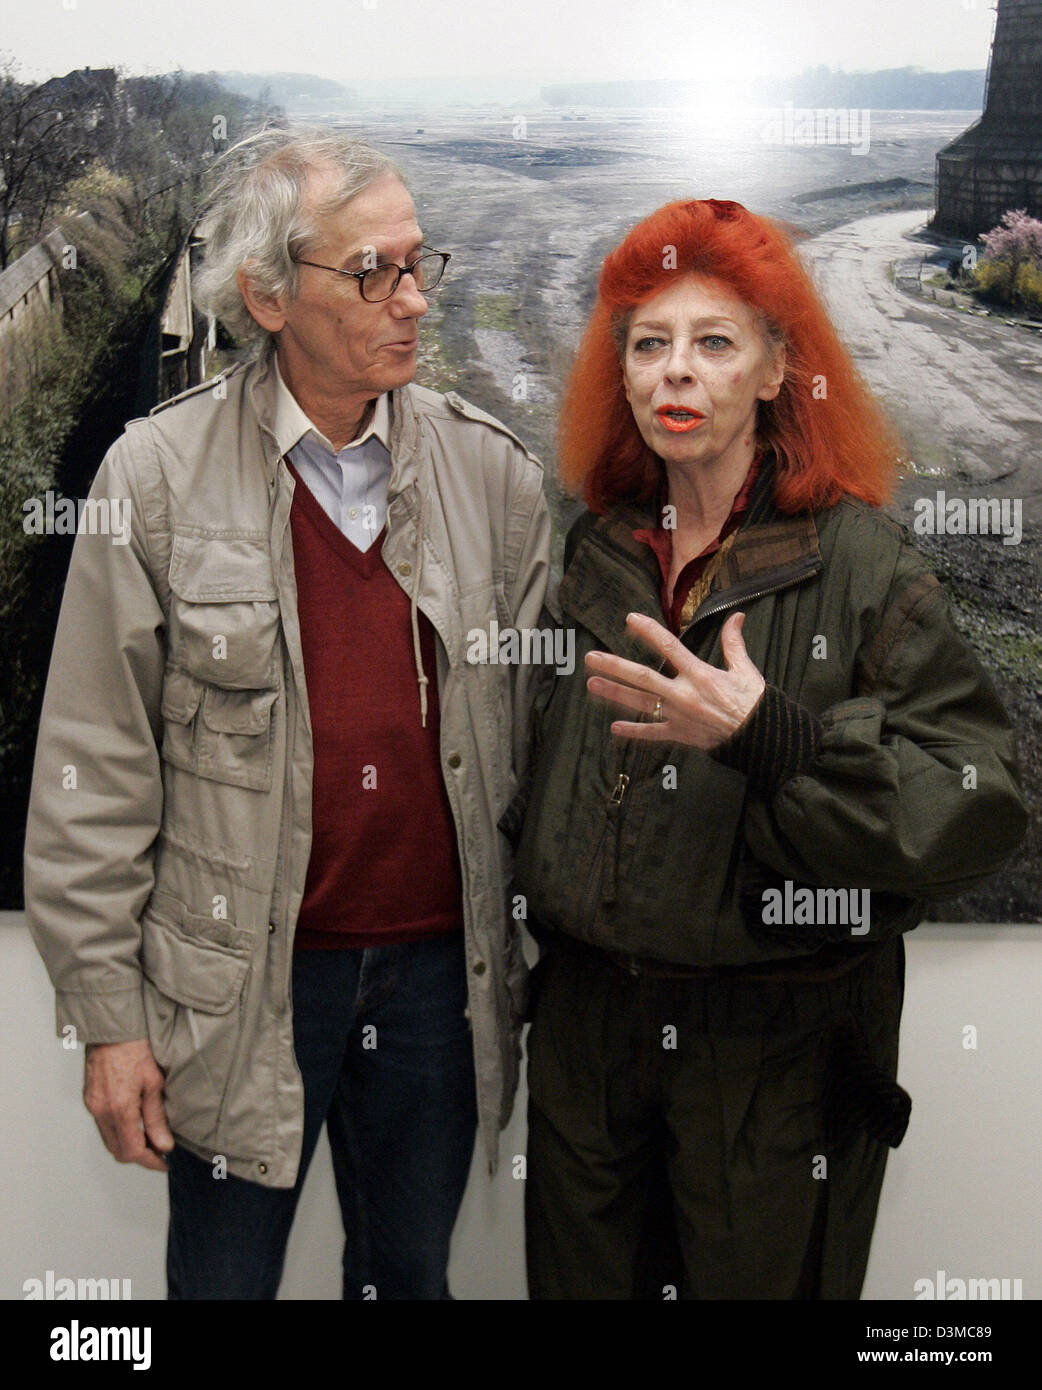 The artist Christo (L) and Jeanne-Claude describe their latest project 'Over the River - Project for Arkansas River, State of Colorado' in the Ludwig gallery of the Castle Oberhausen, Germany, Friday 27 January 2006. The visit took place on the occasion of the exhibition 'Light and Far - Bridges in the New Emscher valley' (leicht und weit - Brücken im Neuen Emschertal) of artist Th Stock Photo